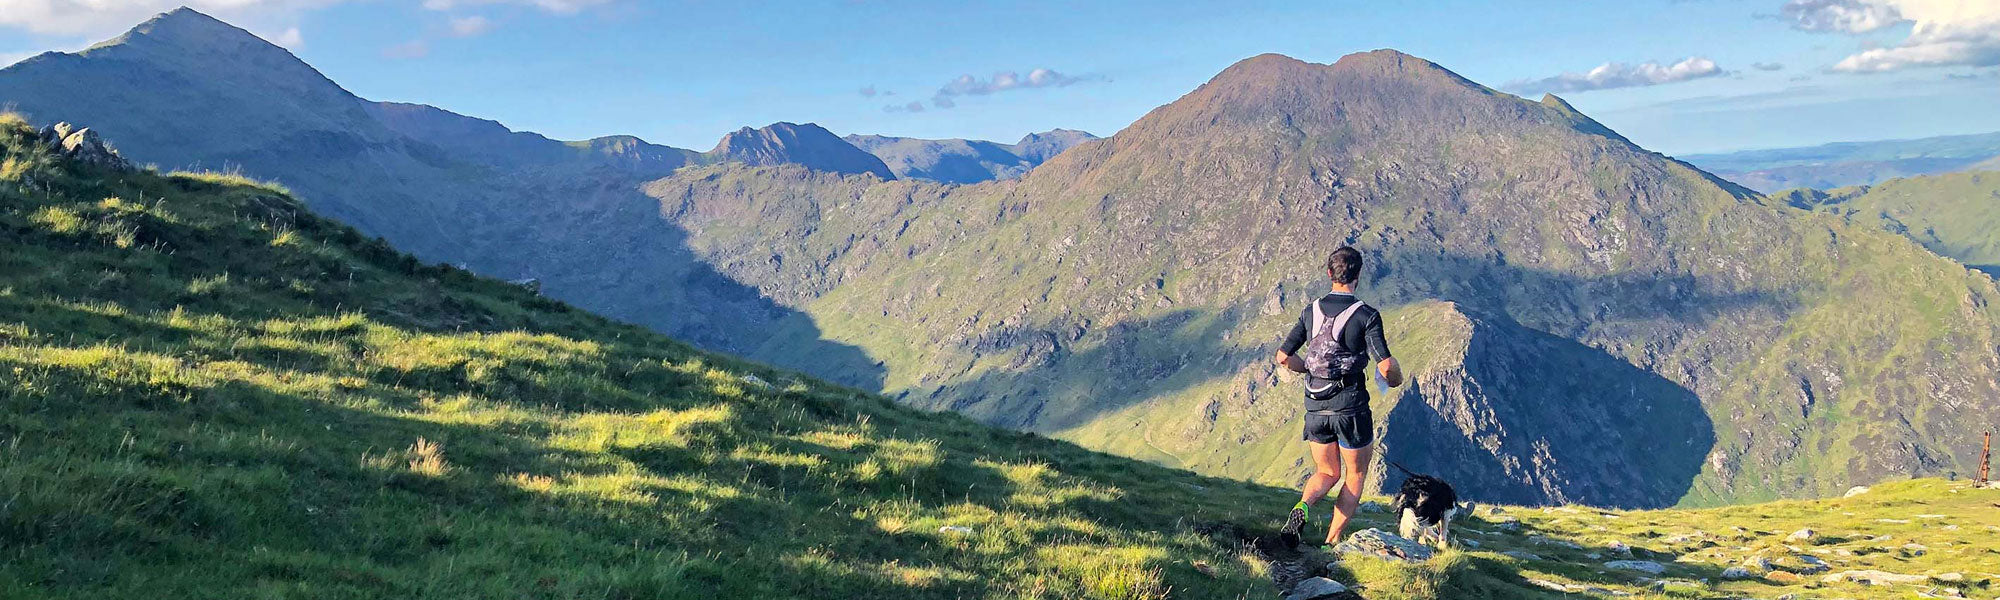 Michael Corrales and Damian Hall chasing an FKT on the Paddy Buckley Round in Scotland